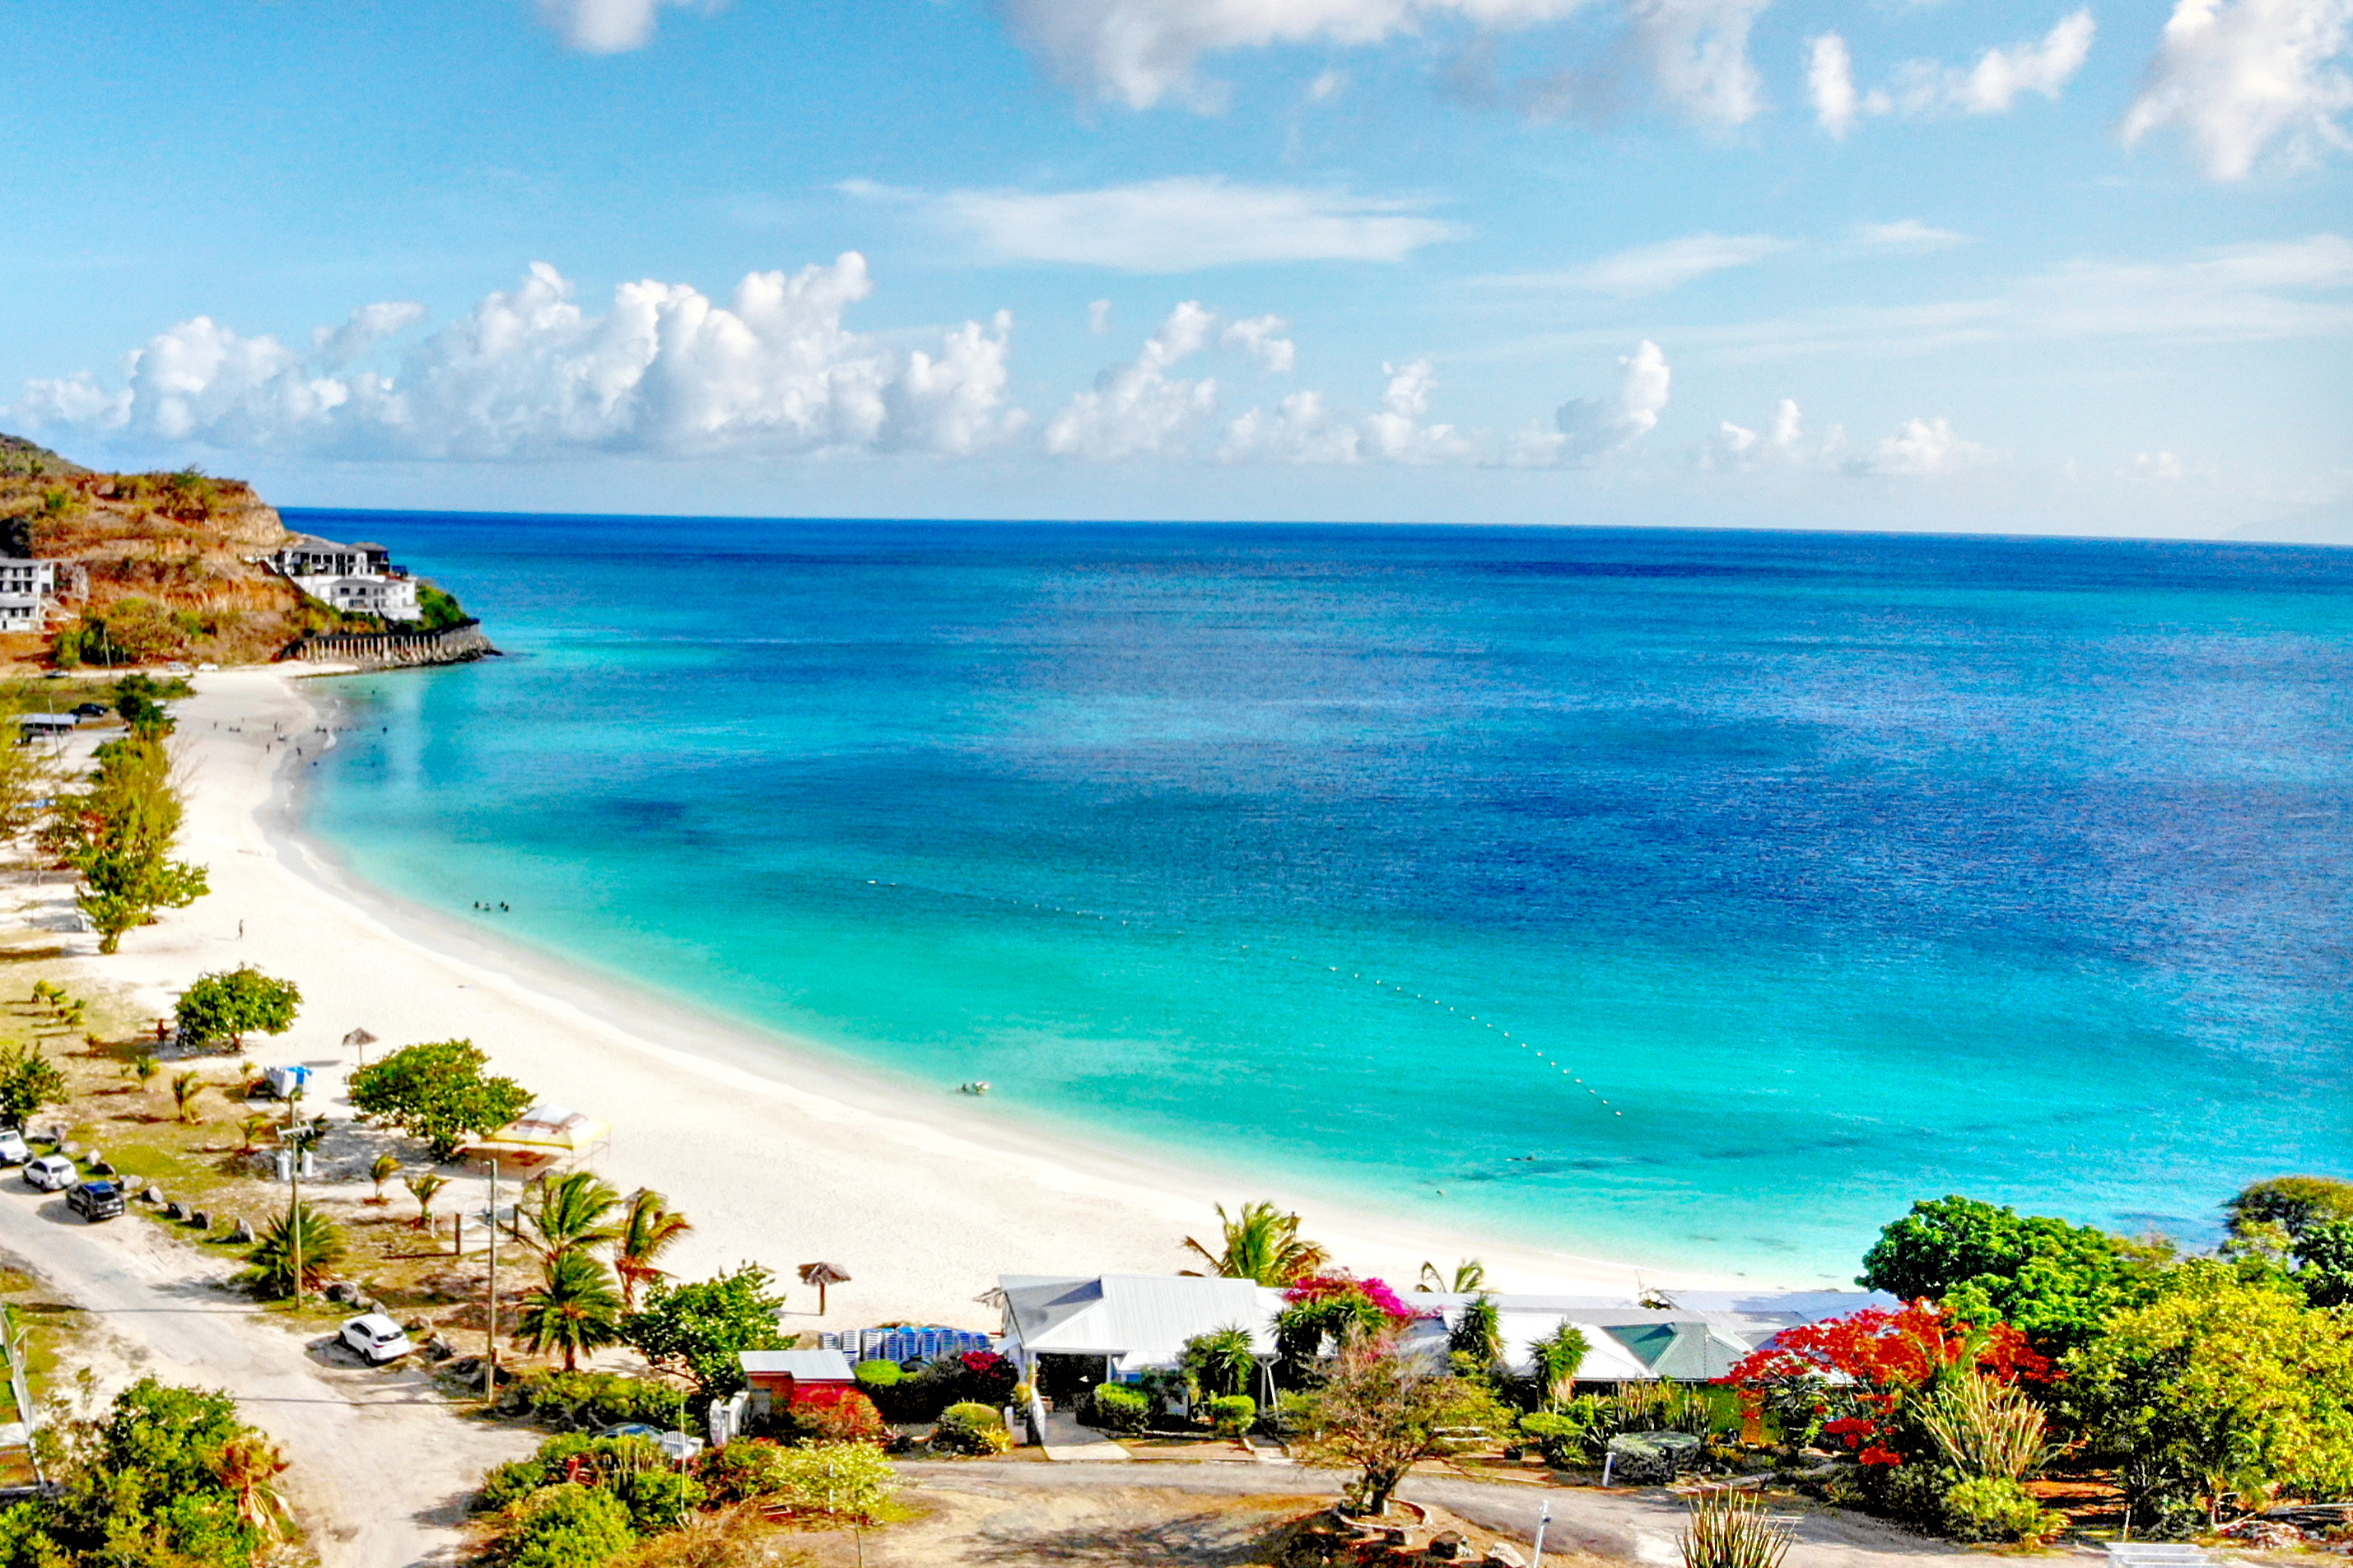 Antigua and Barbuda citizenship by naturalization allows foreigners to live in a warm country